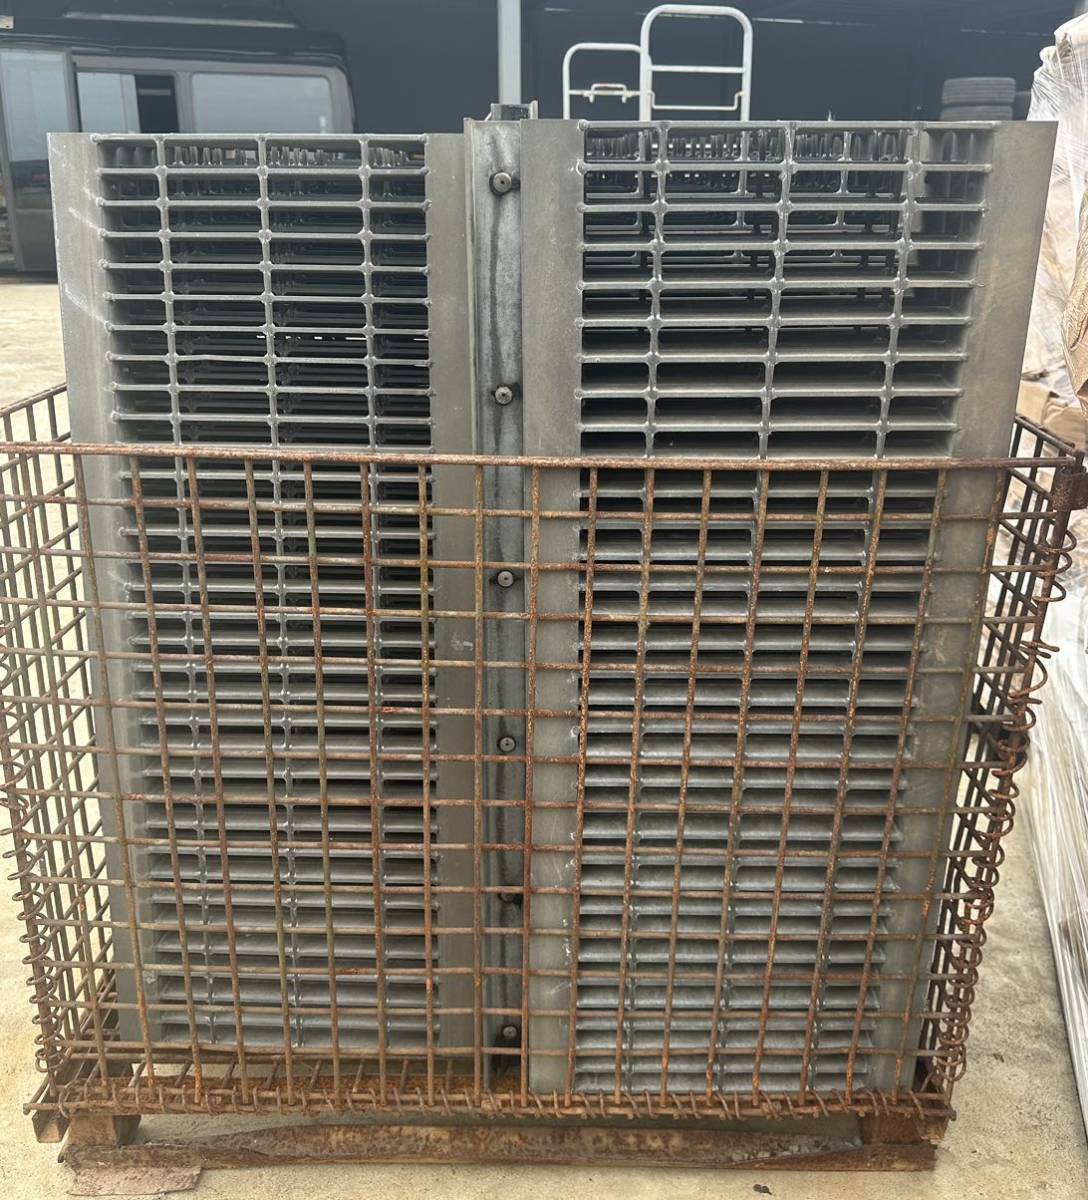  corporation large kre twist type grating groove cover 1 sheets price 8000~ stock 29 sheets equipped 